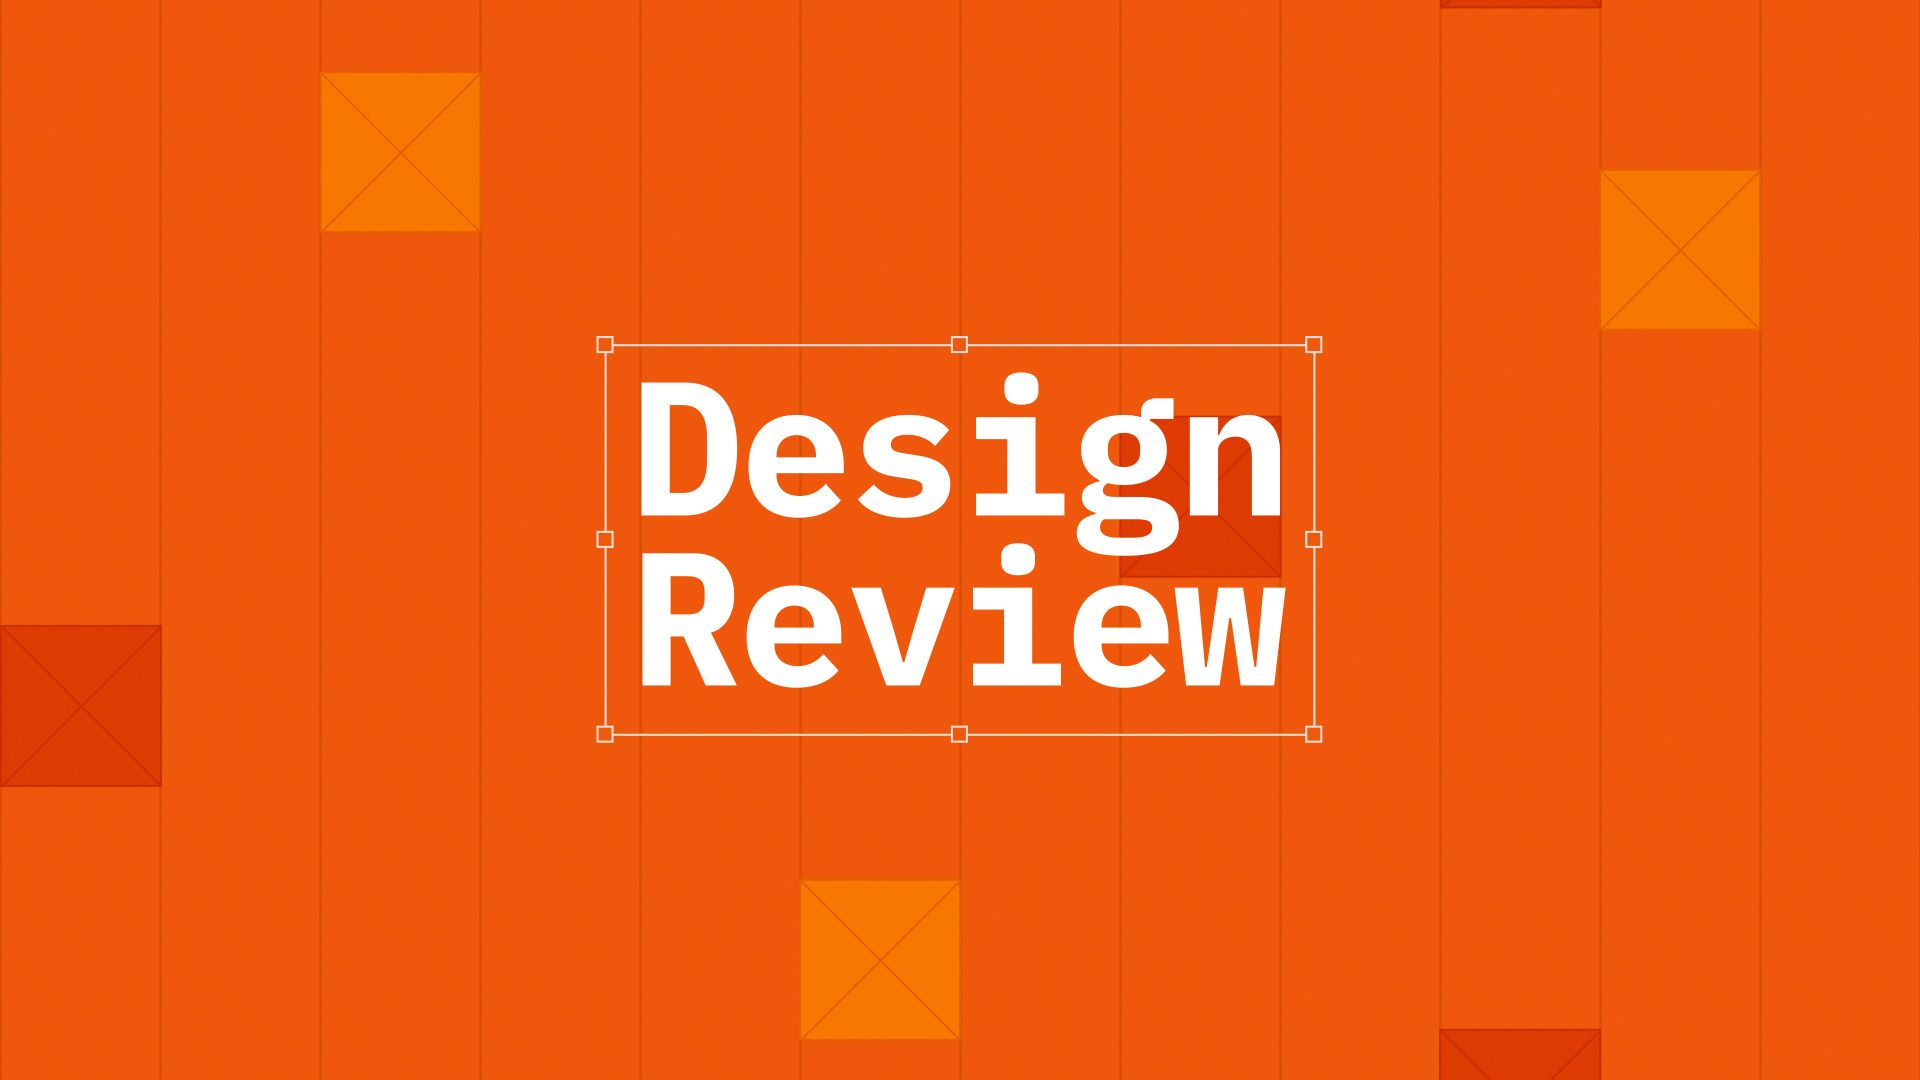 "Design Review" in white, written on an orange background